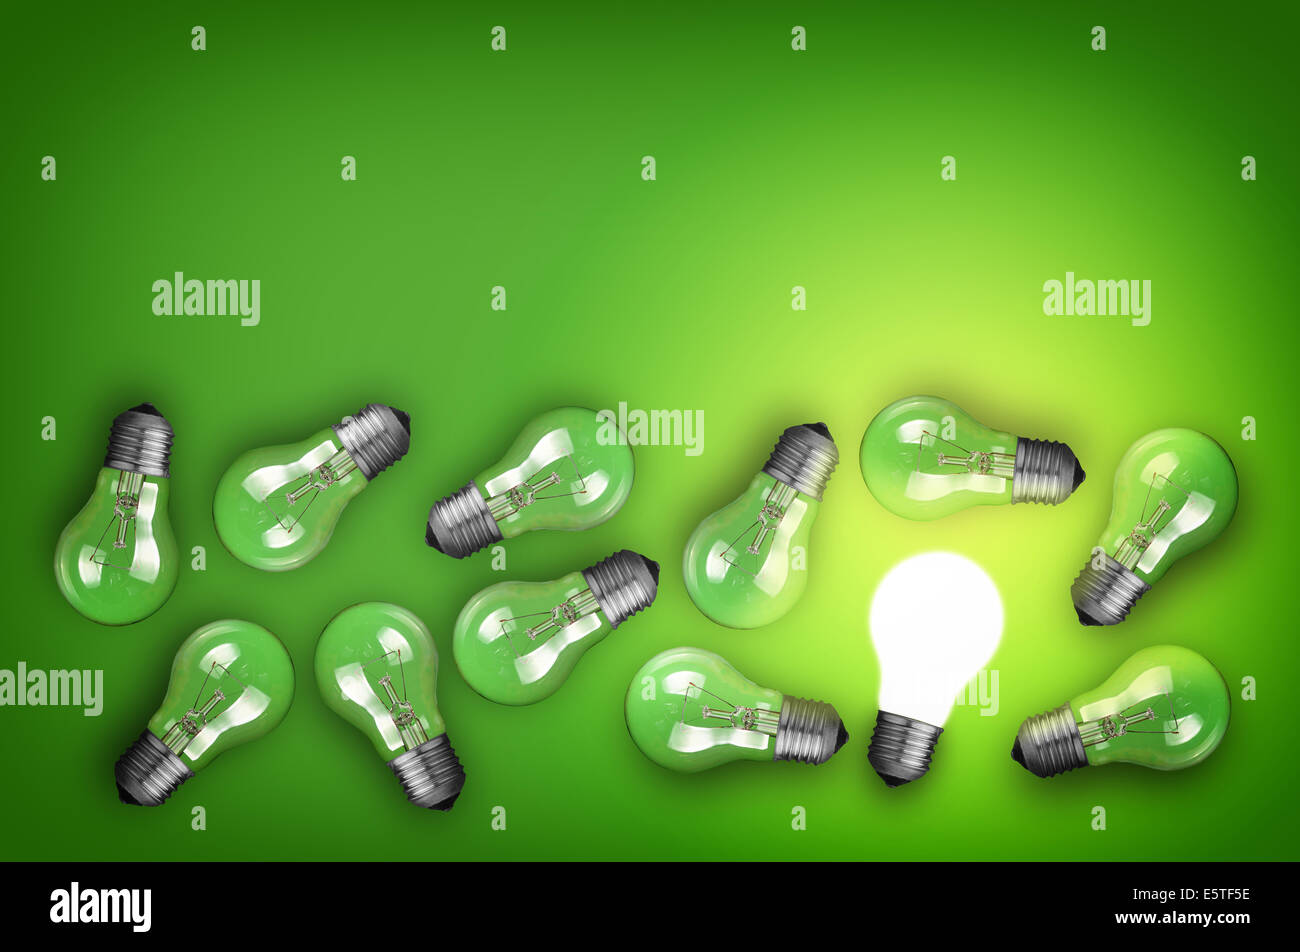 Idea concept with row of light bulbs and glowing bulb Stock Photo